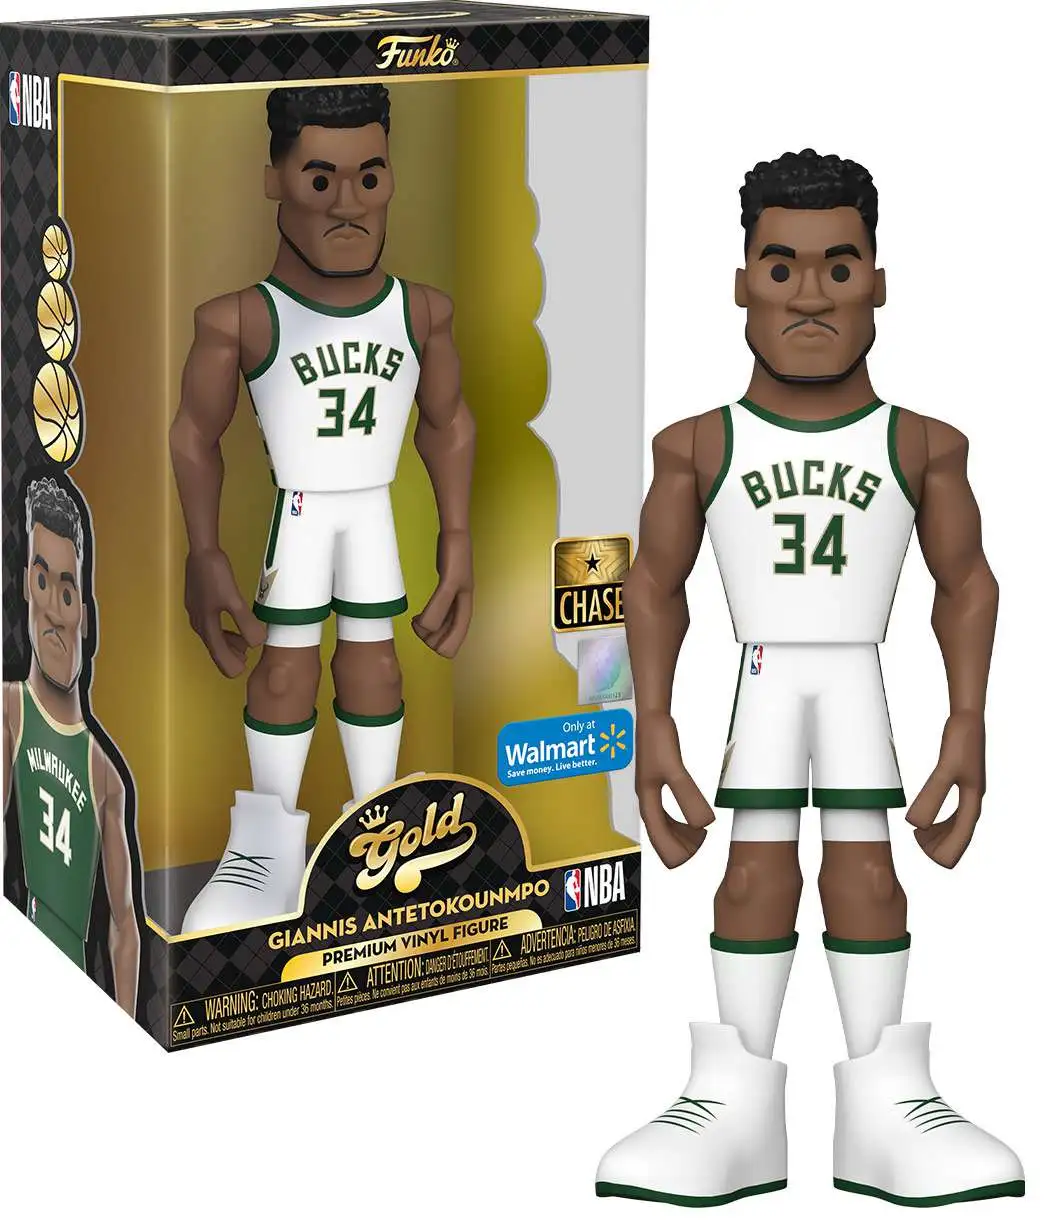 FUNKO Gold: NBA Edition 20+ Premium Legends/Future Legends options -  Chase/Excl